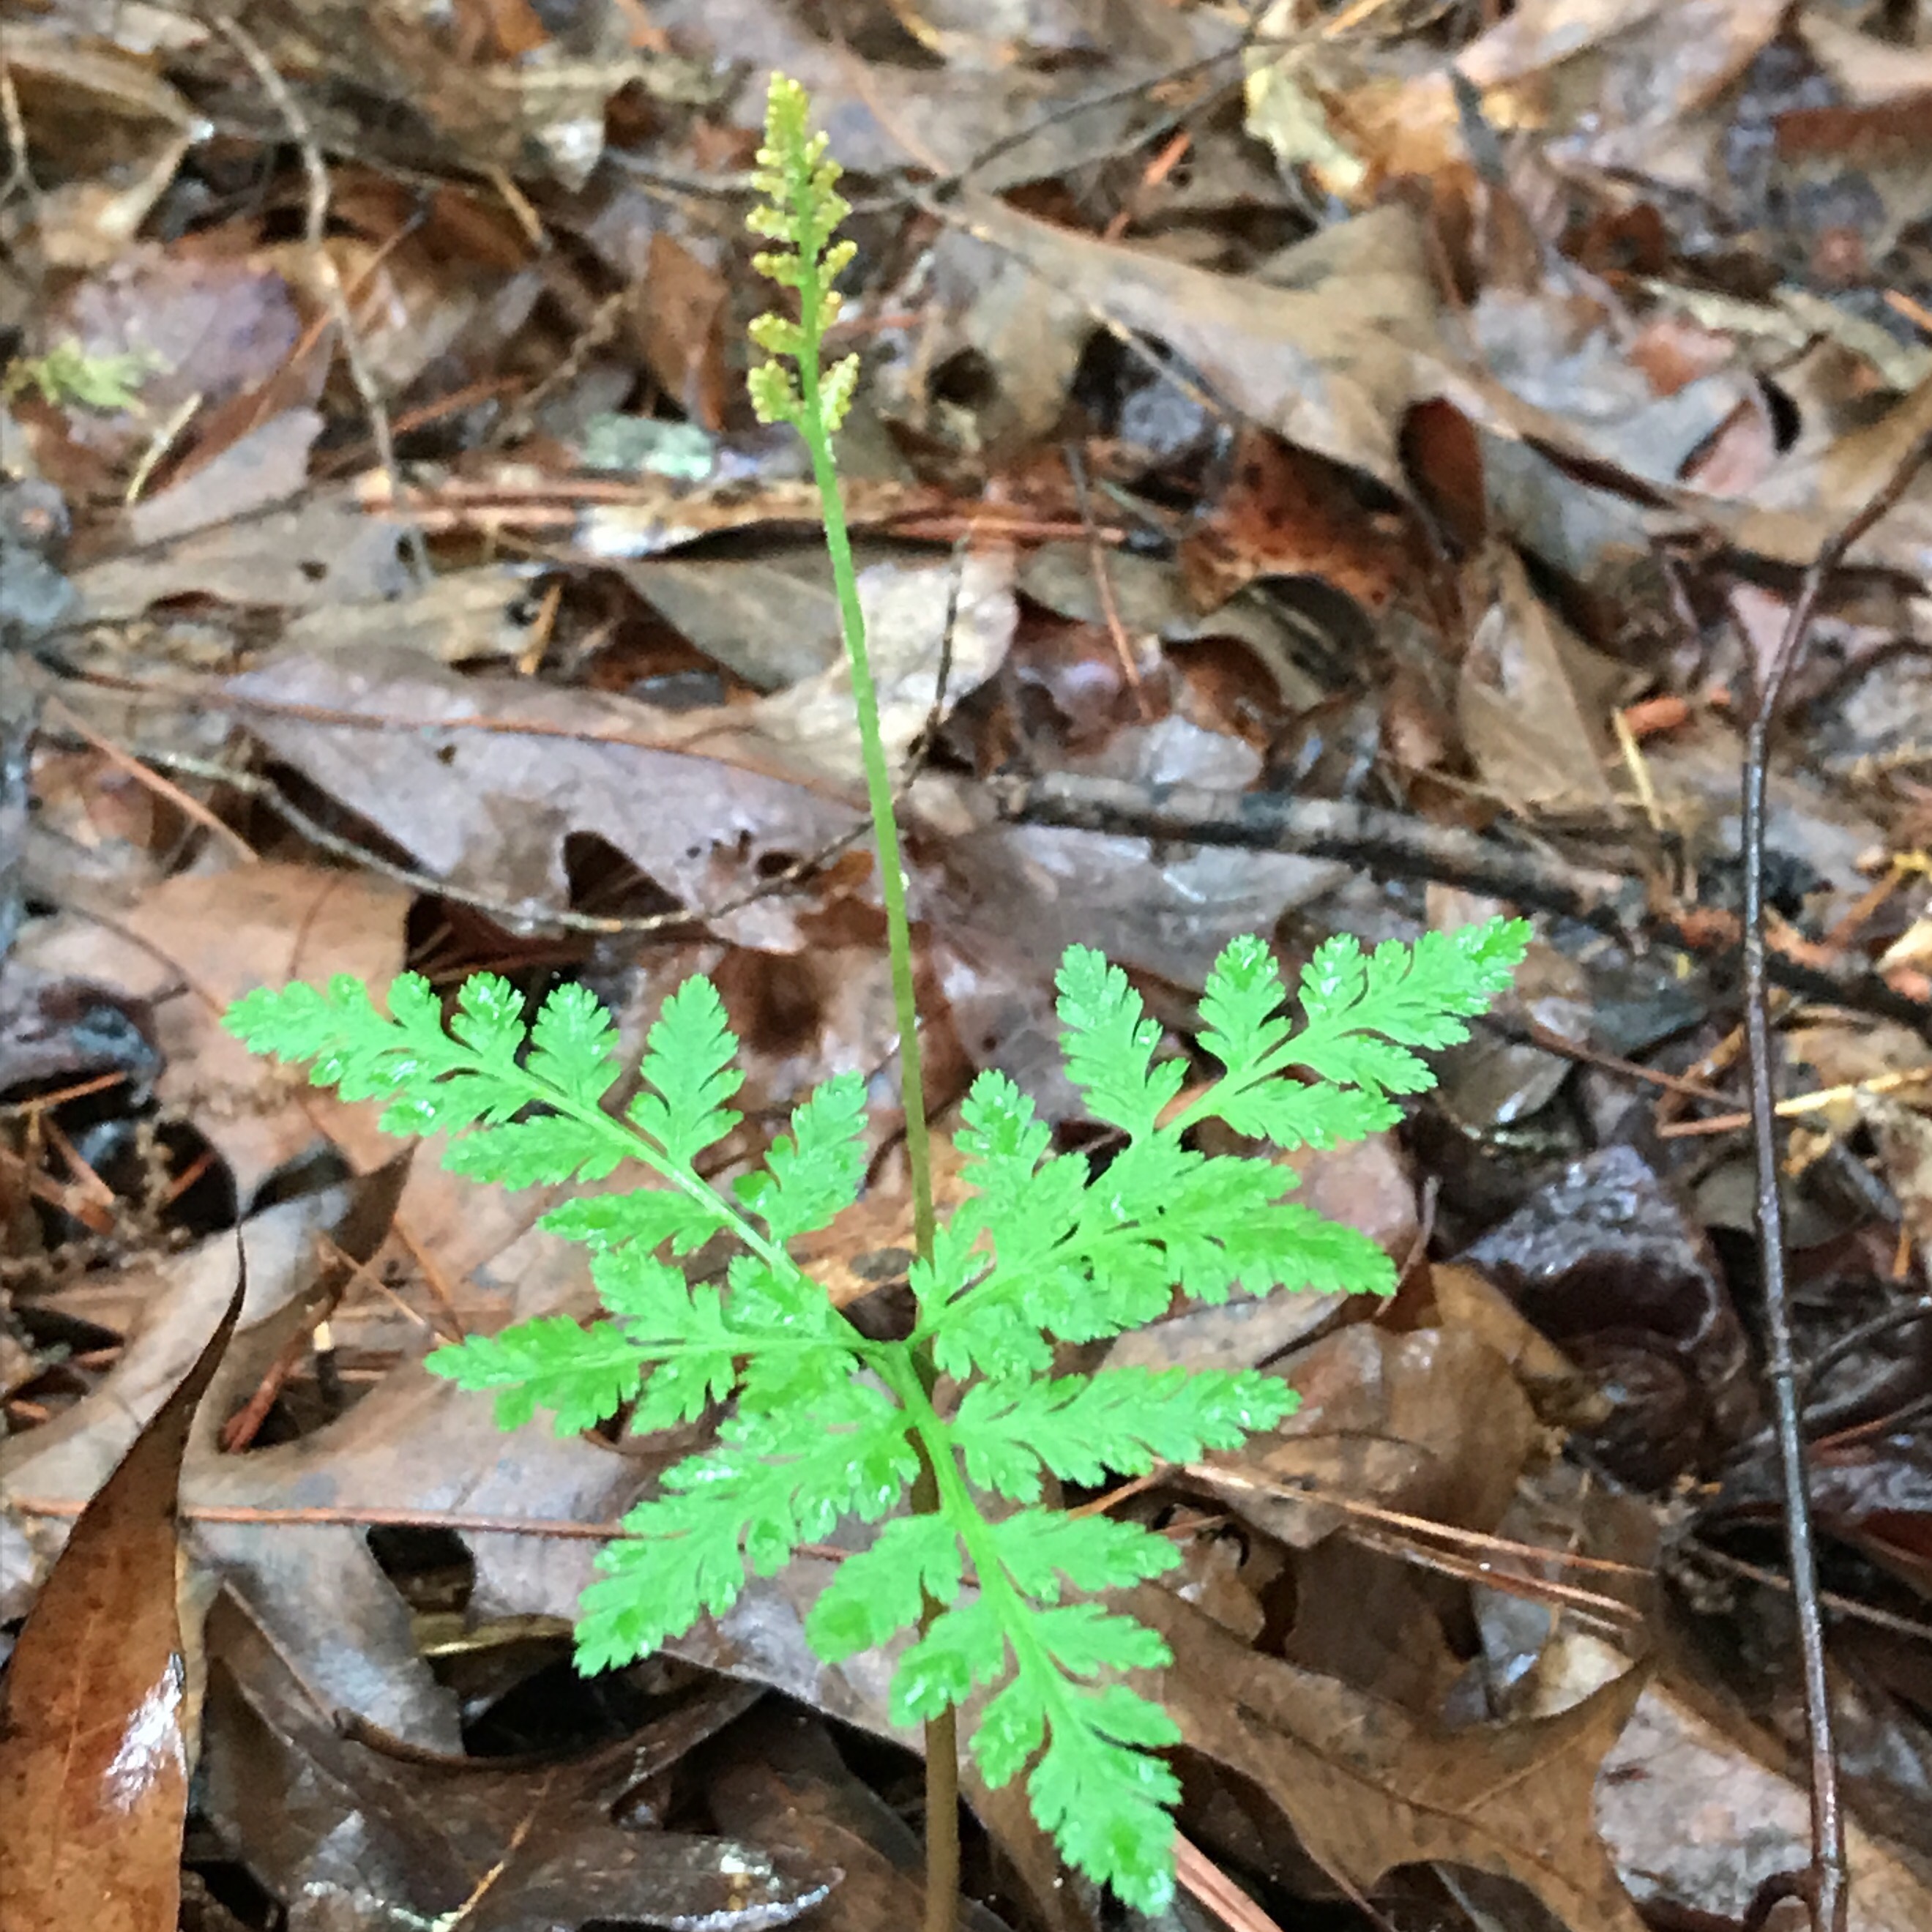 The Scientific Name is Botrypus virginianus [= Botrychium virginianum]. You will likely hear them called Rattlesnake Fern. This picture shows the Fern with Fertile Frond of Botrypus virginianus [= Botrychium virginianum]